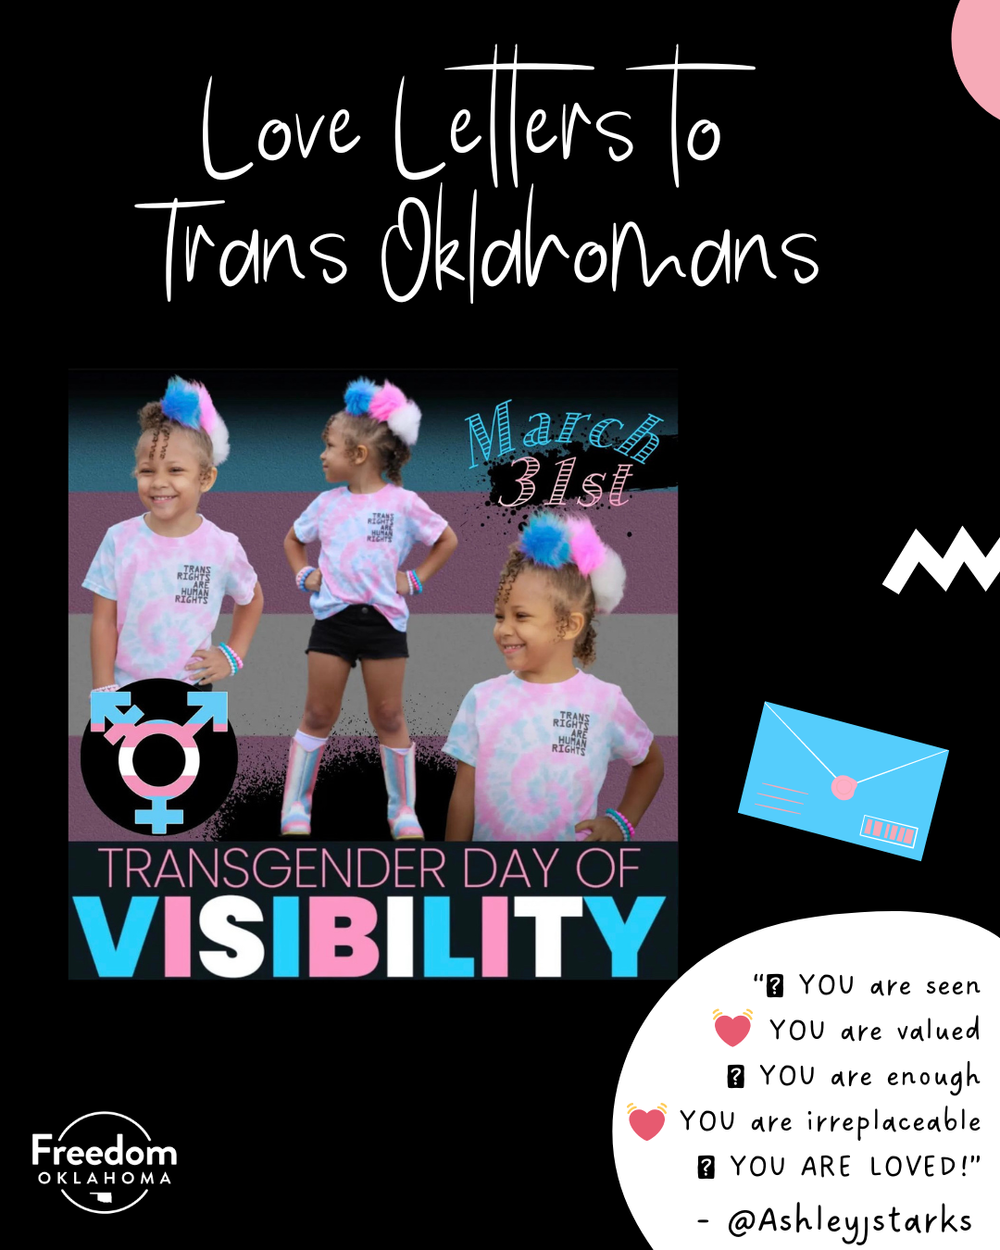  Similar black graphic with a white blob with text: “YOU are seen YOU are valued YOU are enough YOU are irreplaceable YOU ARE LOVED! - @ashleyjstarks” with blue, pink, and white heart emojis. To the left is their submission: "March 31st Transgender D